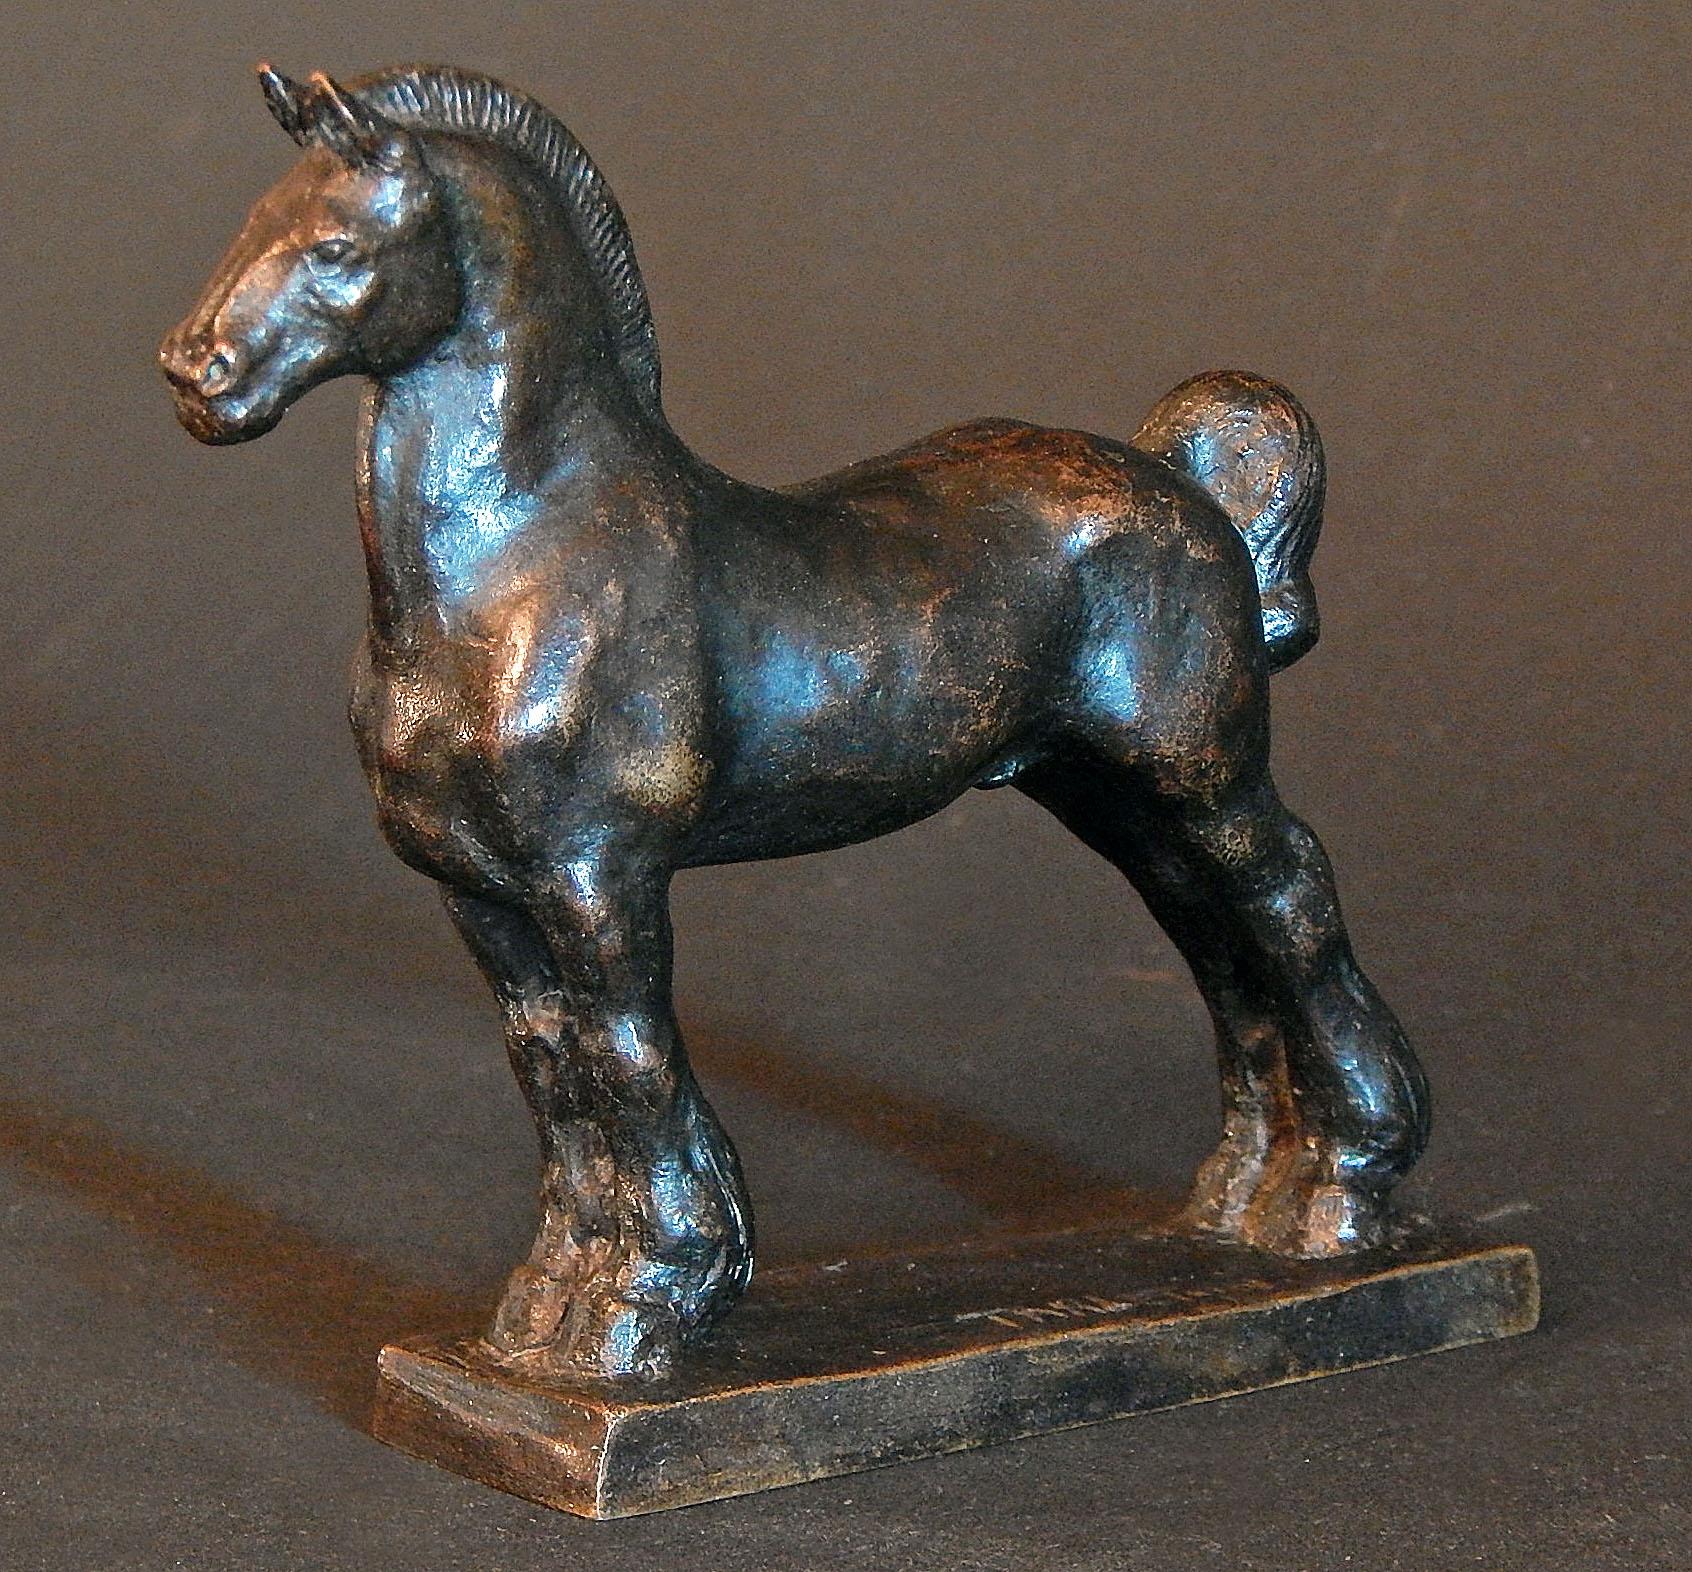 Sculpted by Mary Tarleton Knollenberg, this rare bronze of a standing horse depicts its tail in a classic mud knot, used by equestrians to keep a horse's tail free of dirt and mud from the track. The animal is beautifully realized and is given great